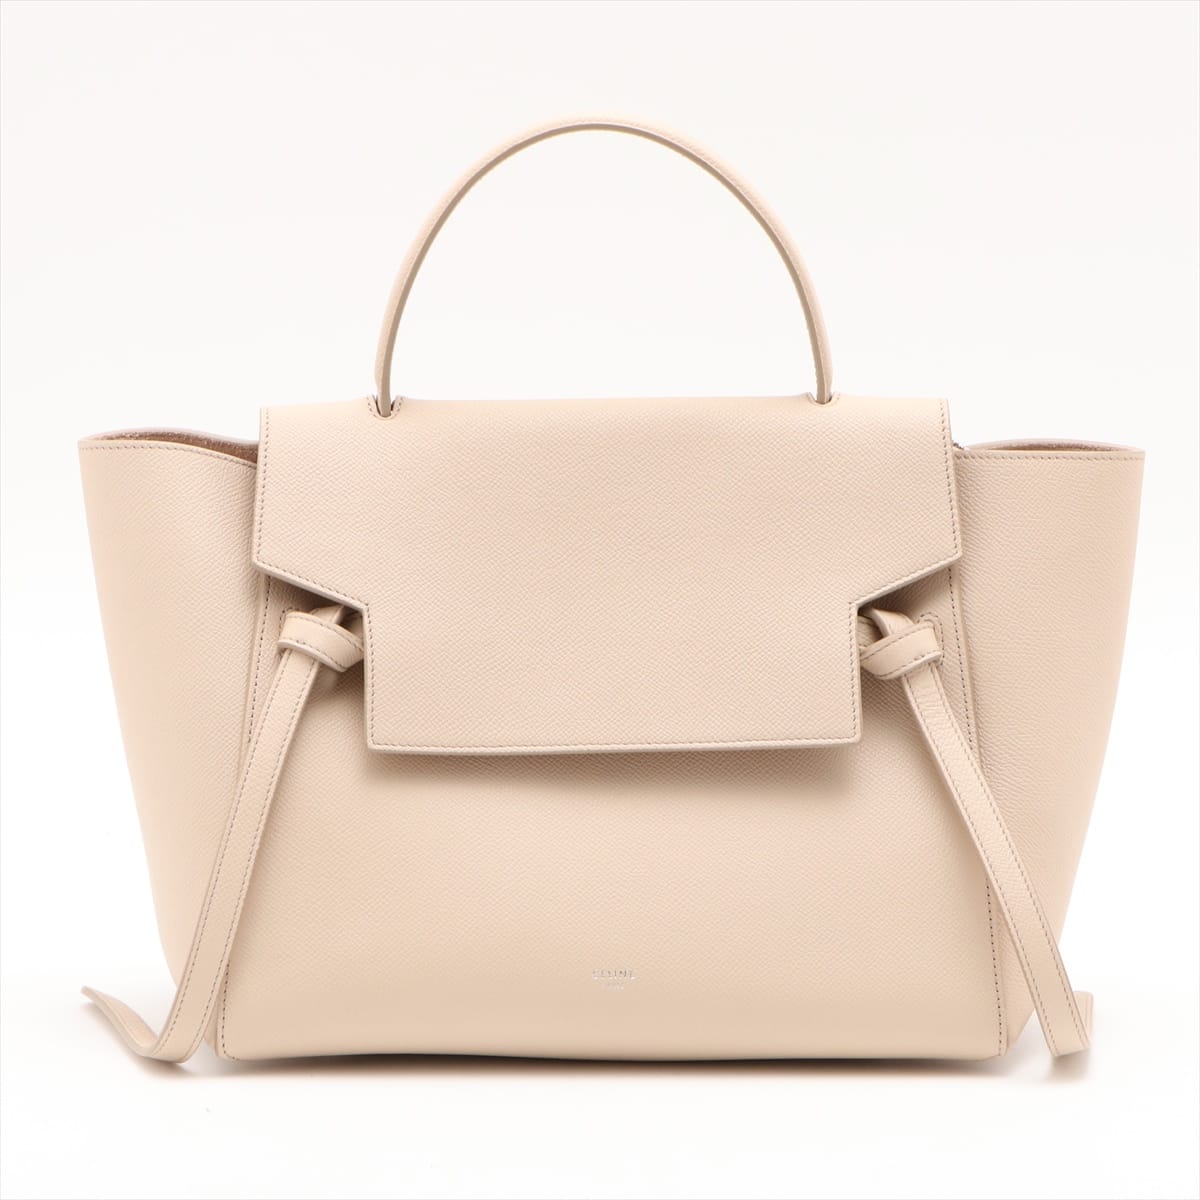 CELINE Belt Bag Leather 2way handbag Beige 176103ZVA.23BA There is a stain on the back